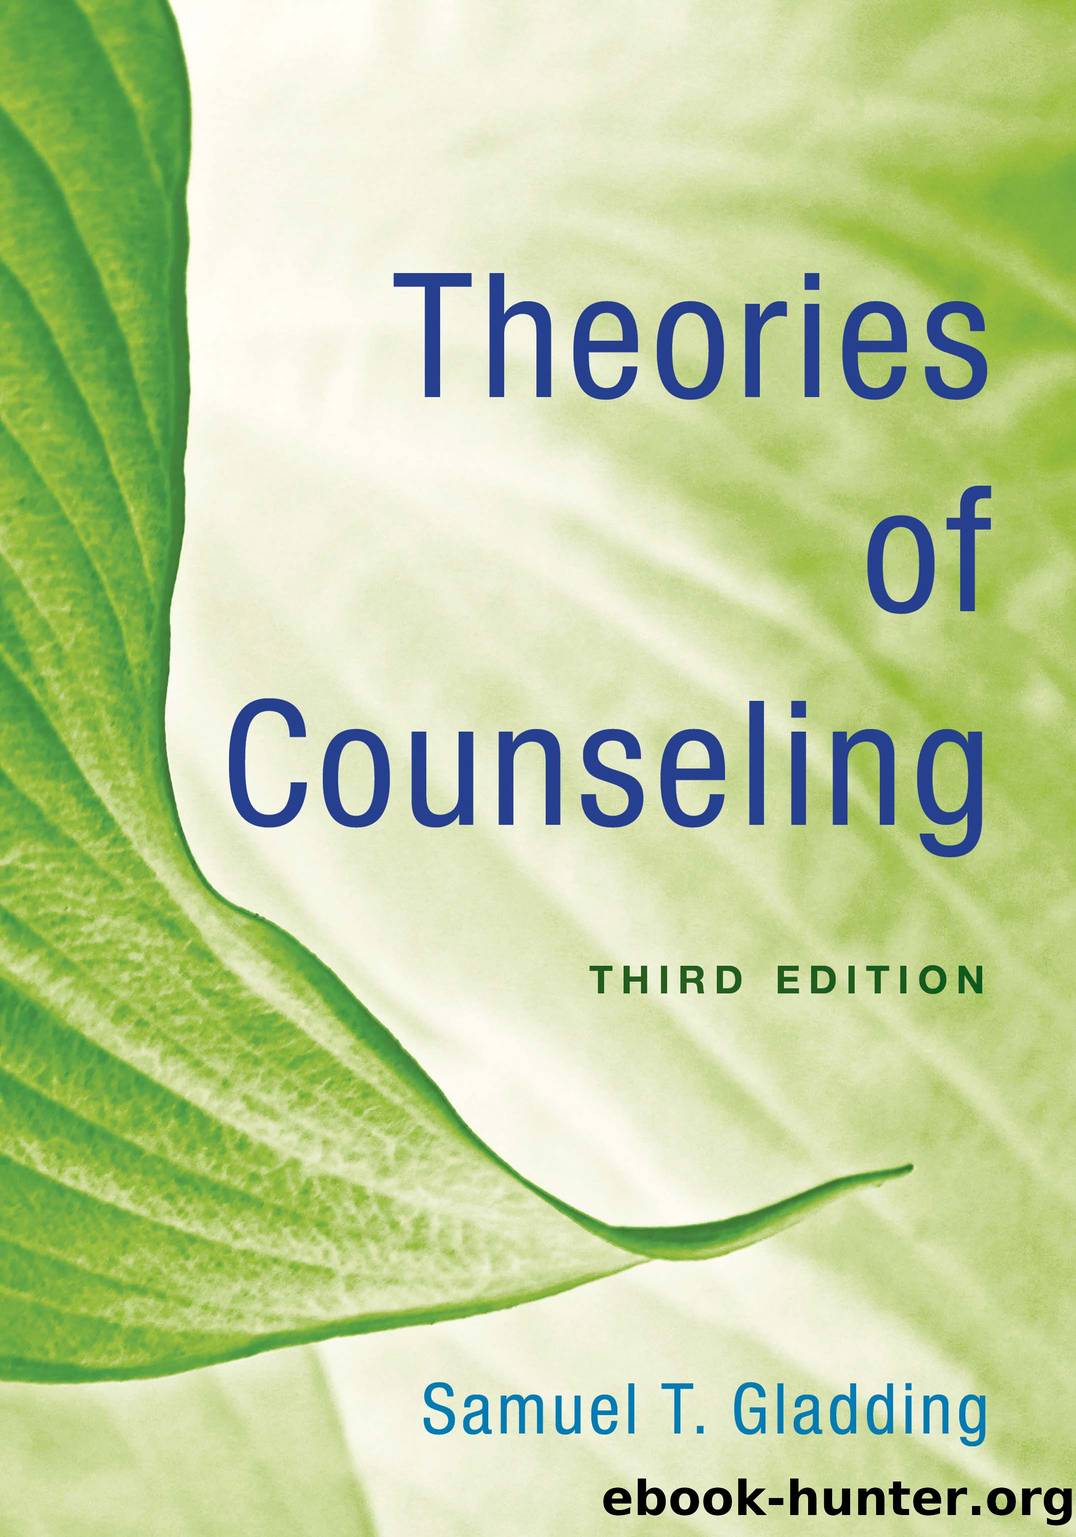 Theories of Counseling by Samuel T. Gladding;